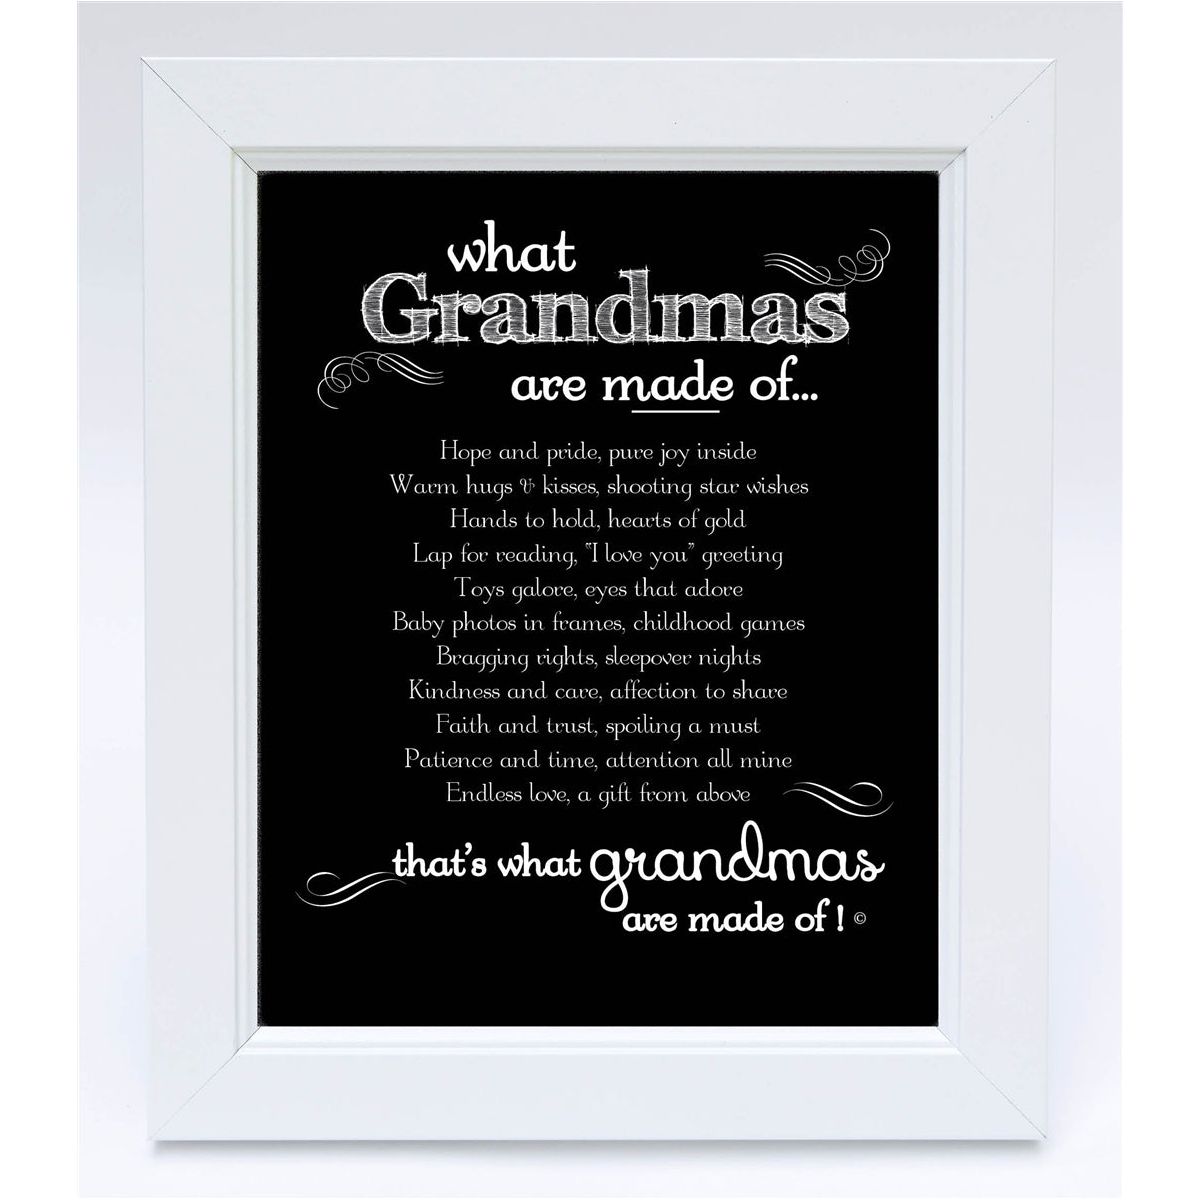 White 8"x10" frame with "What Grandma's are Made of..." poem.